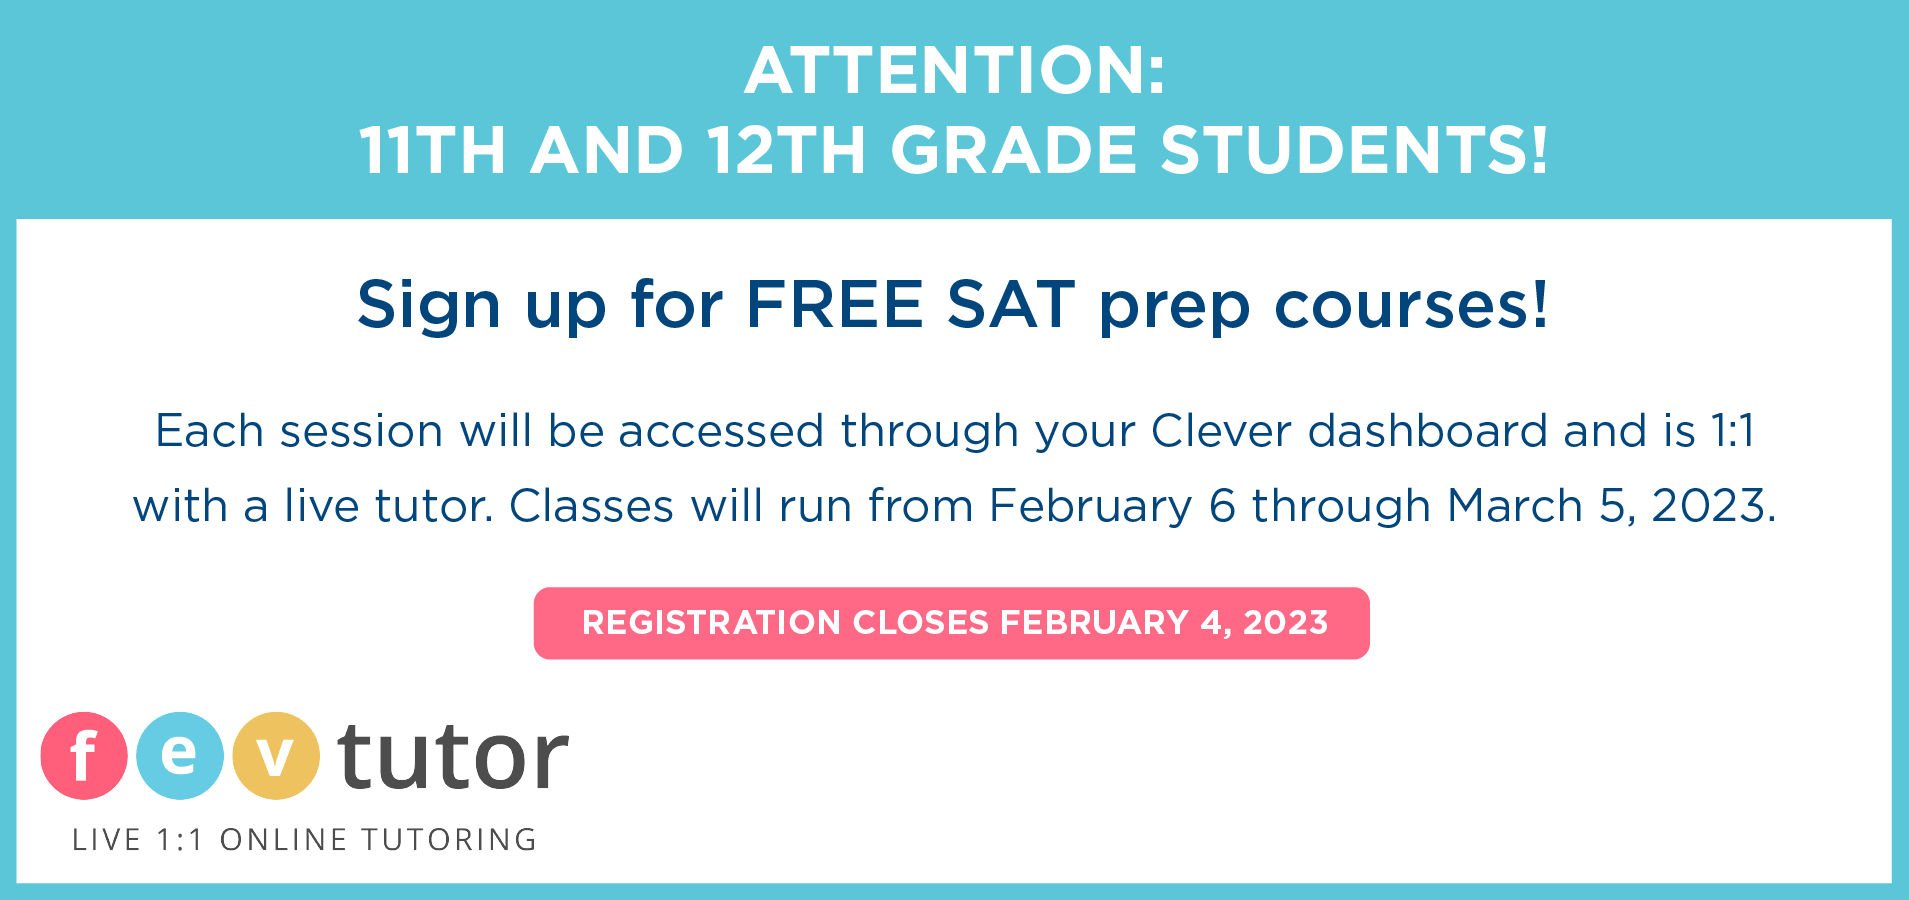 Sign up for FREE SAT prep courses